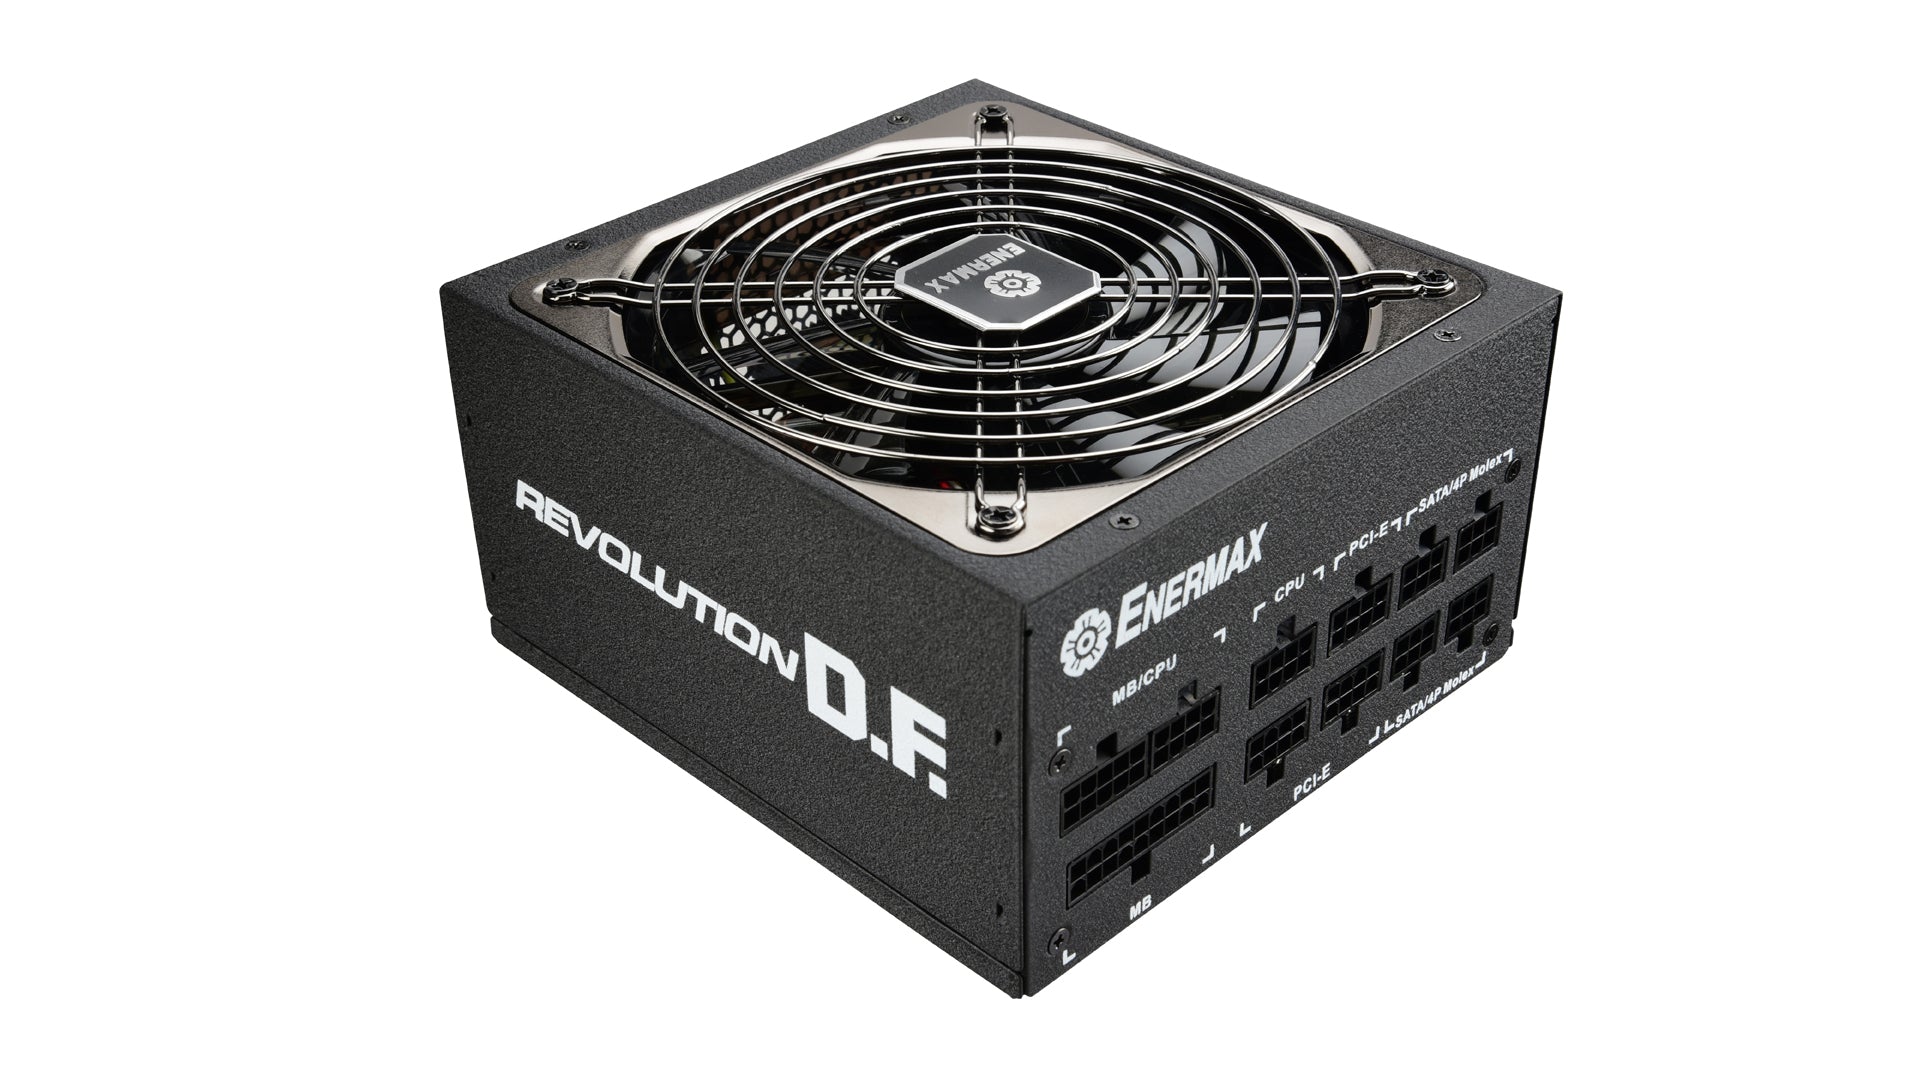 REVOLUTION D.F. 750W / 80 PLUS® Gold Certified Power Supply